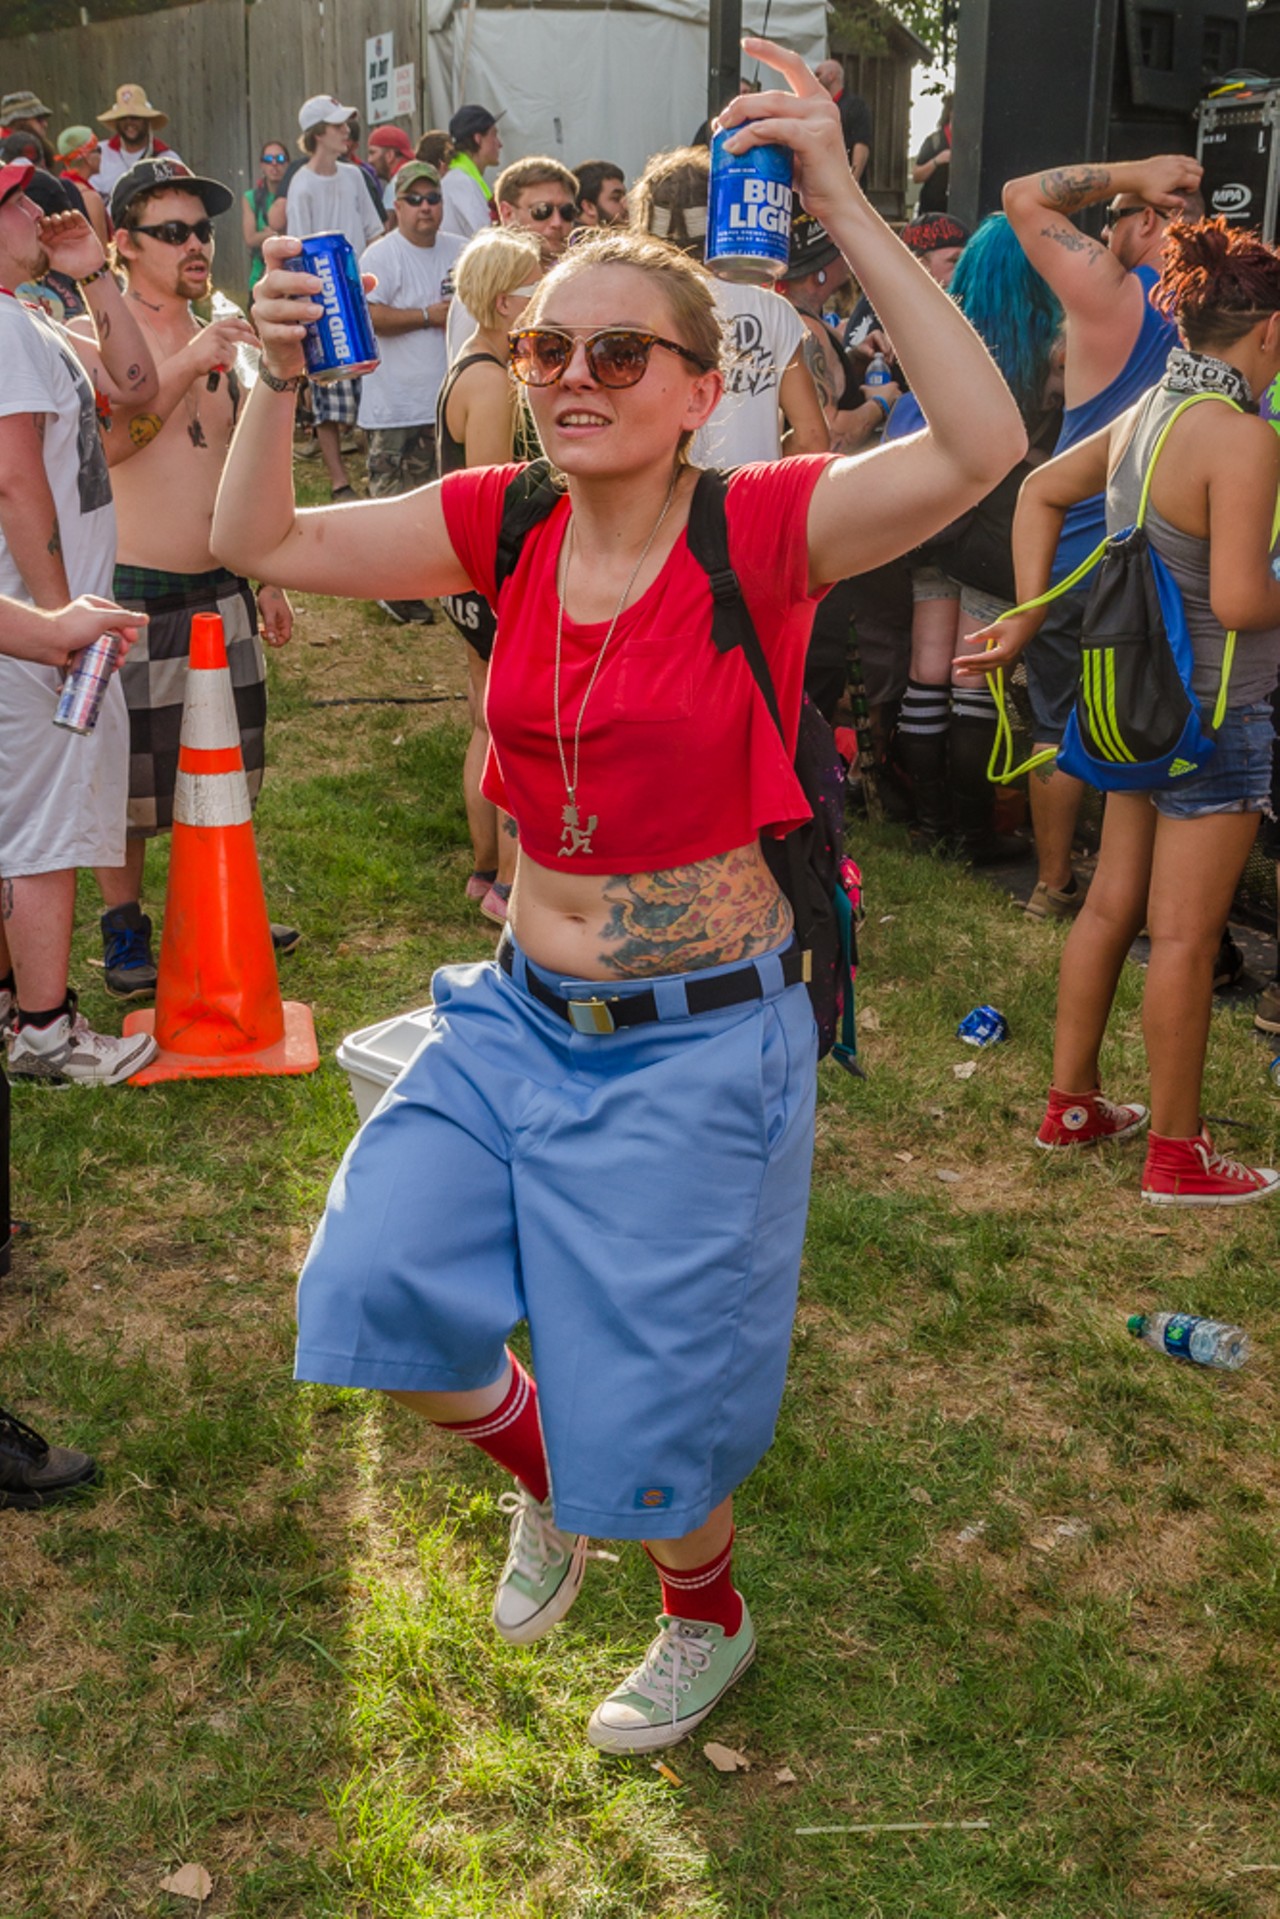 Everything we saw at the 2017 Gathering of the Juggalos